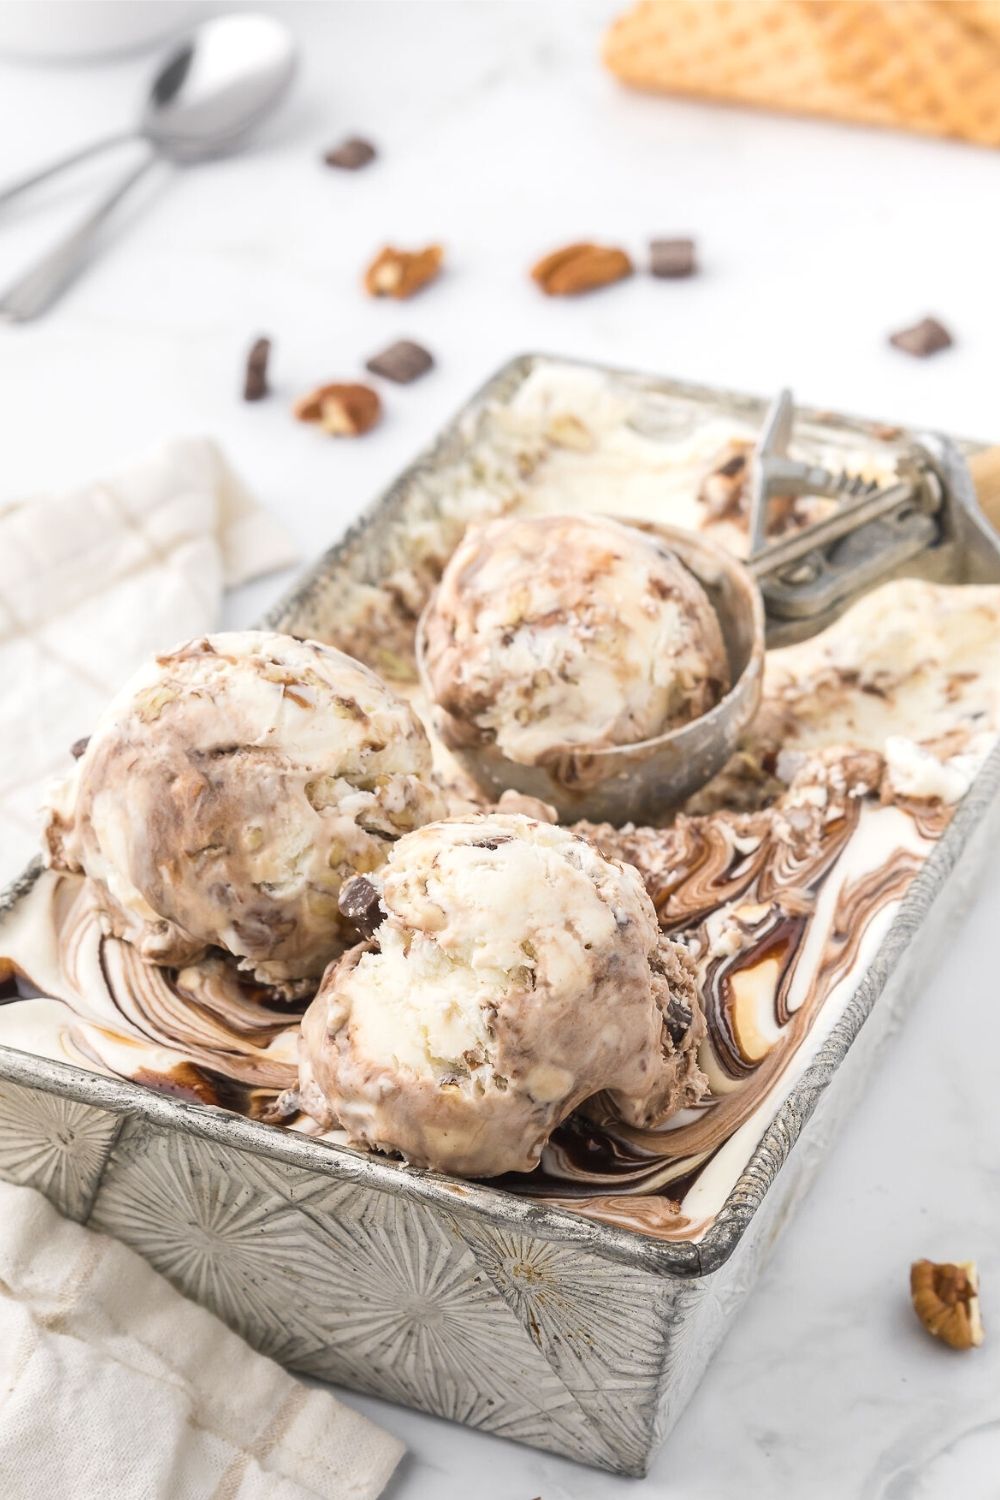 an ice cream scoop is scooping rounds of homemade turtle ice cream from a loaf pan.